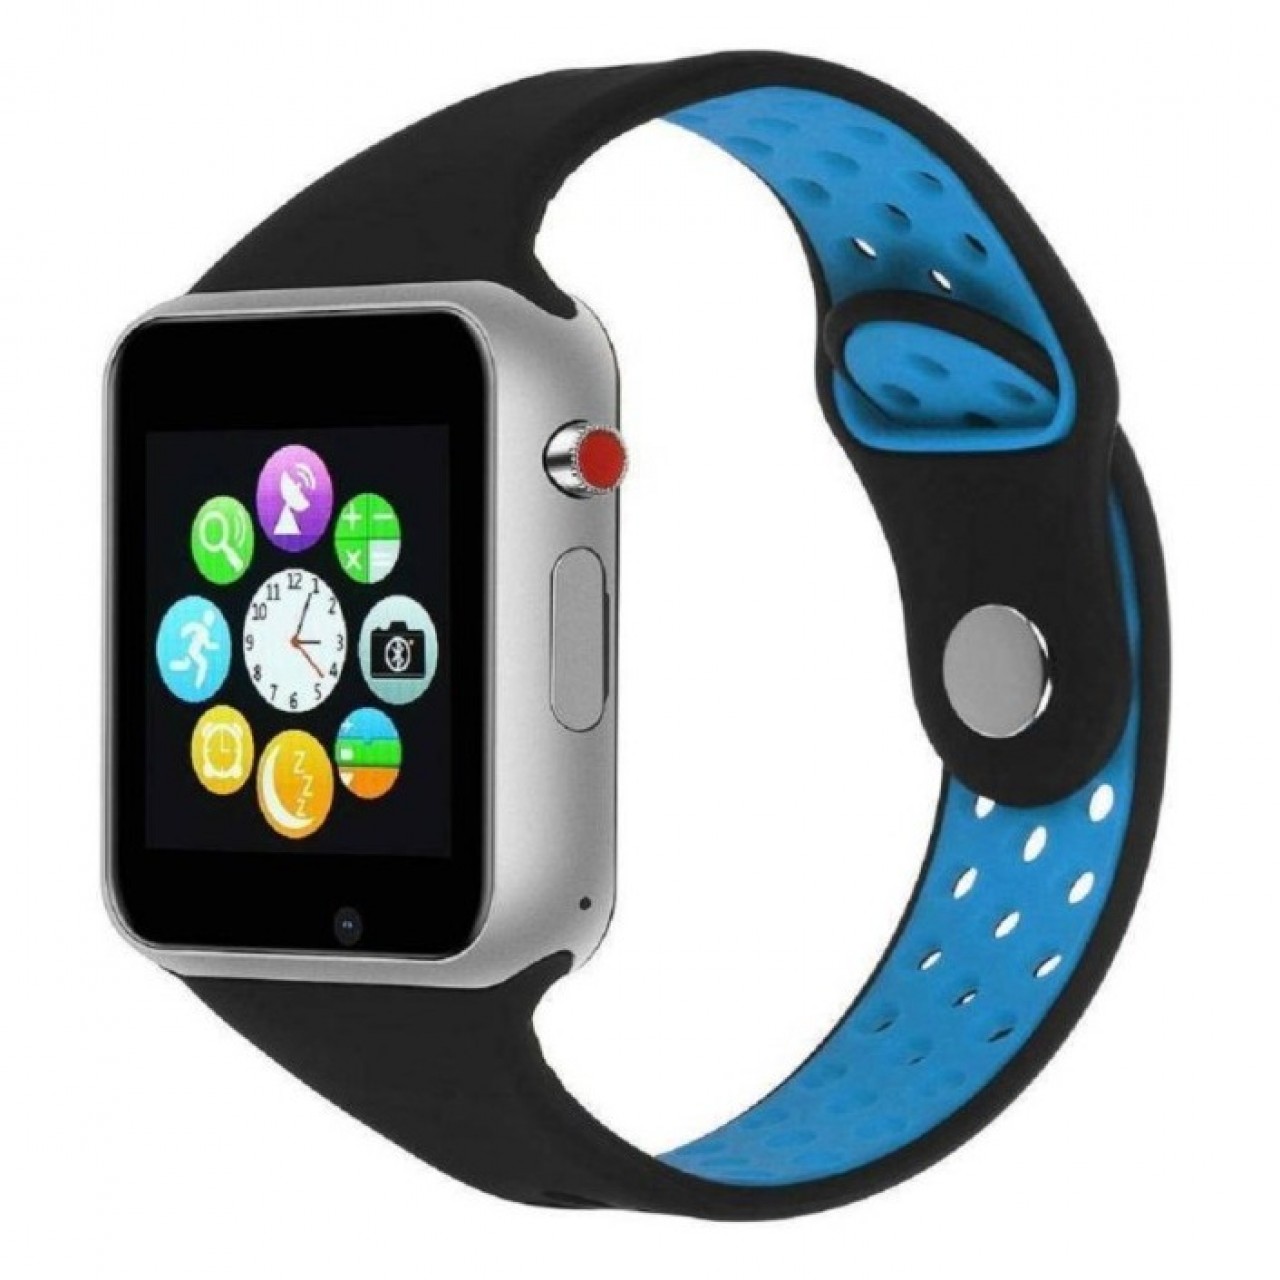 Bluetooth Smart Watch M3 With Camera Support SIM TF Card For IOS Android - Blue